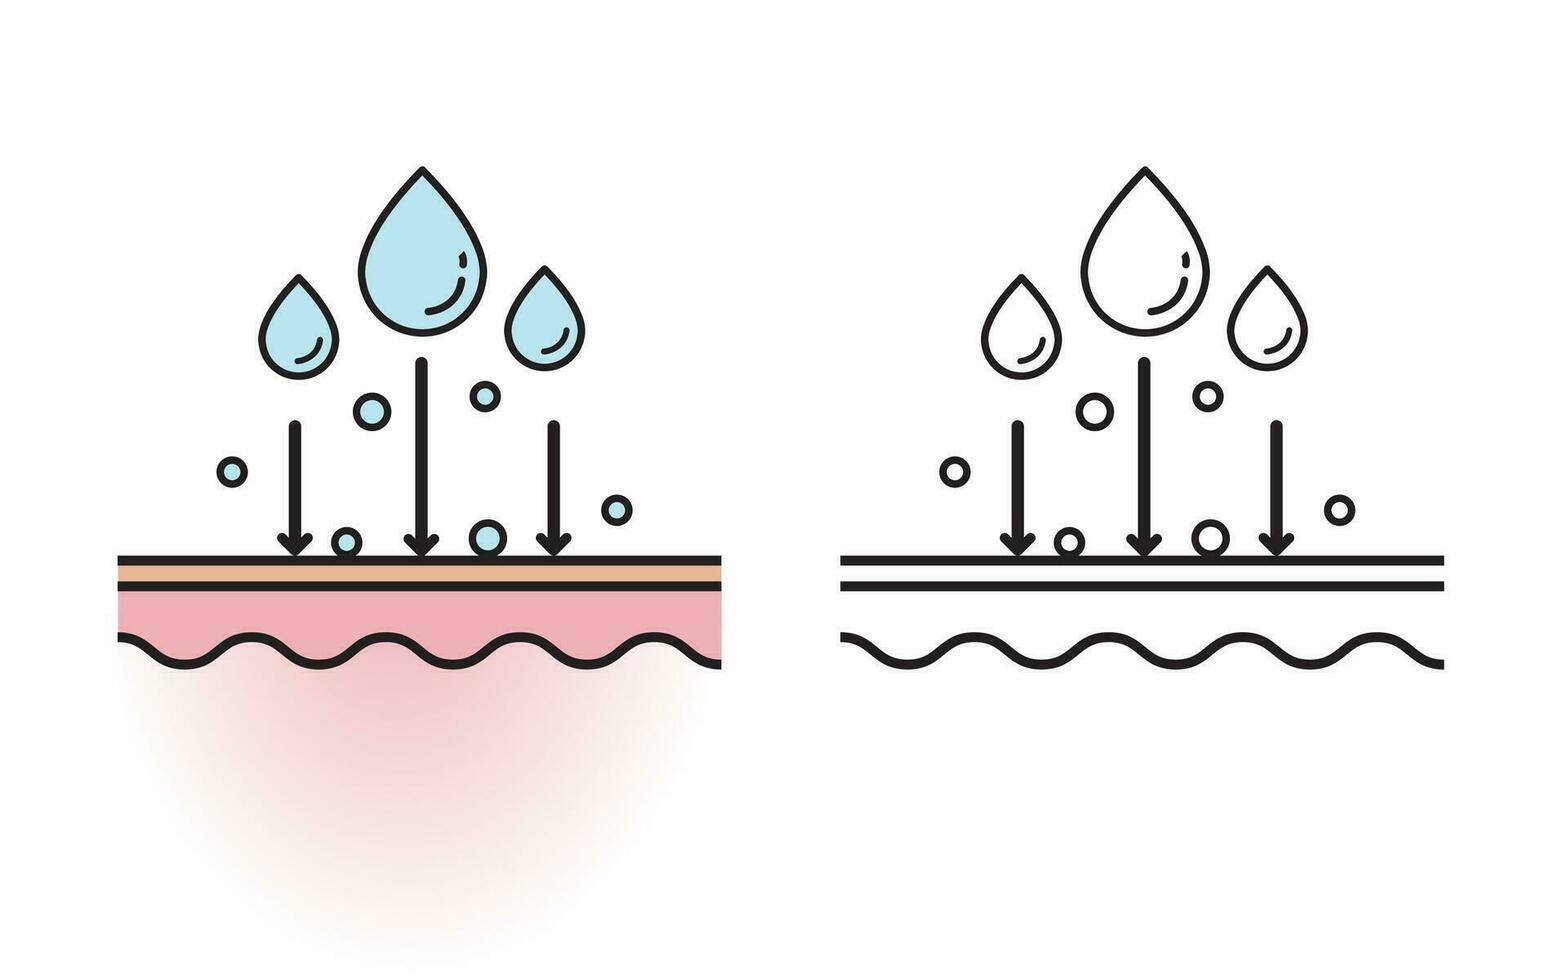 The skincare product does not get absorbed, that does not properly penetrate into the skin layer with color and outline drawing vector on white background. Flat icon illustration.